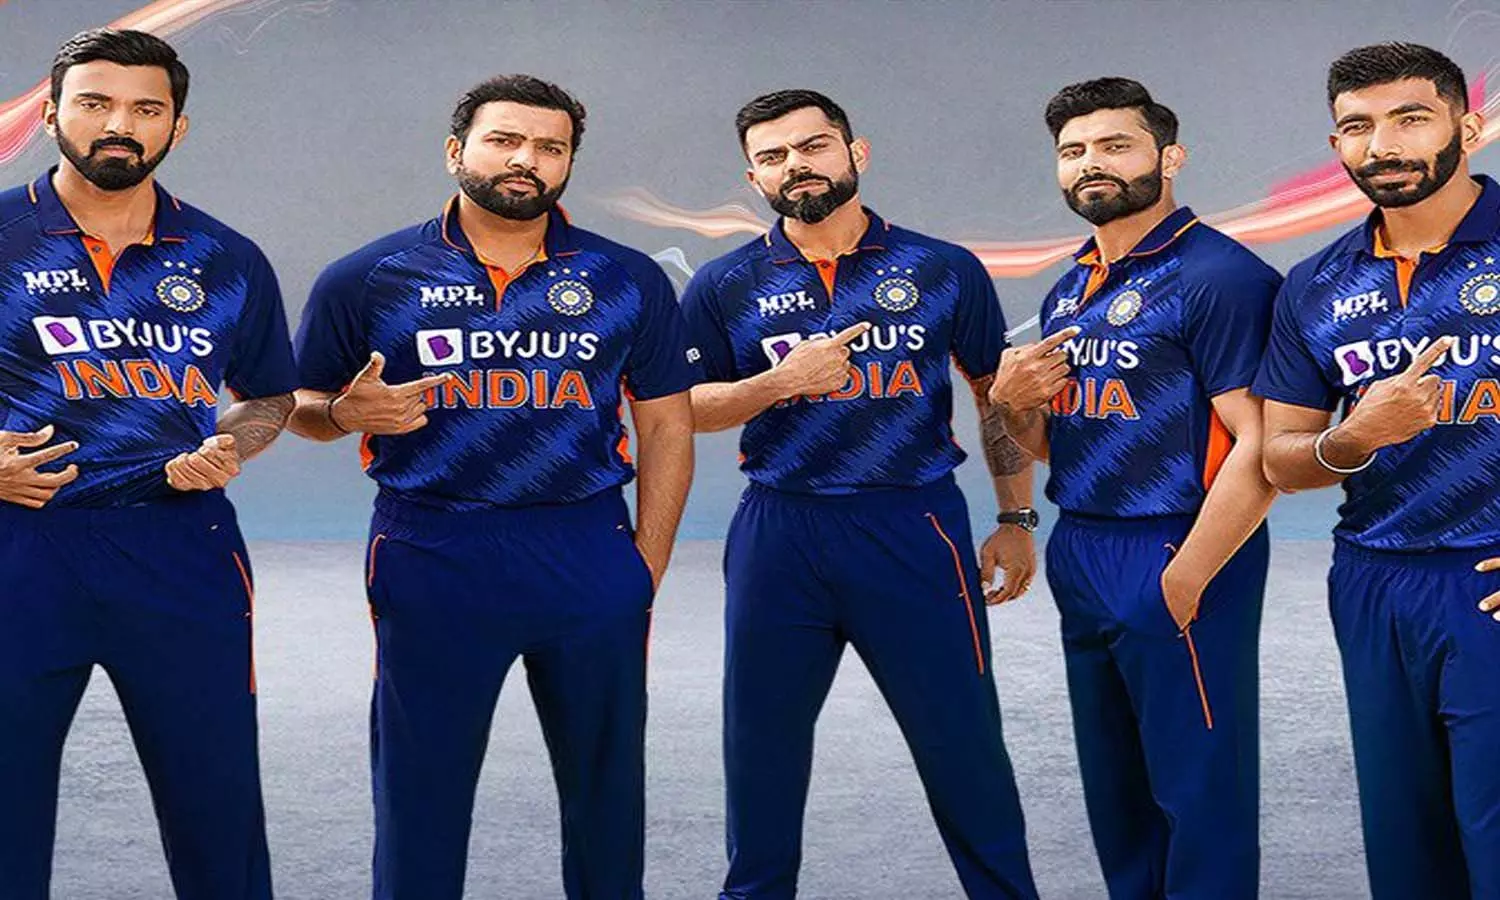 WATCH: Team Indias new jersey for T20 World Cup displayed at Burj Khalifa